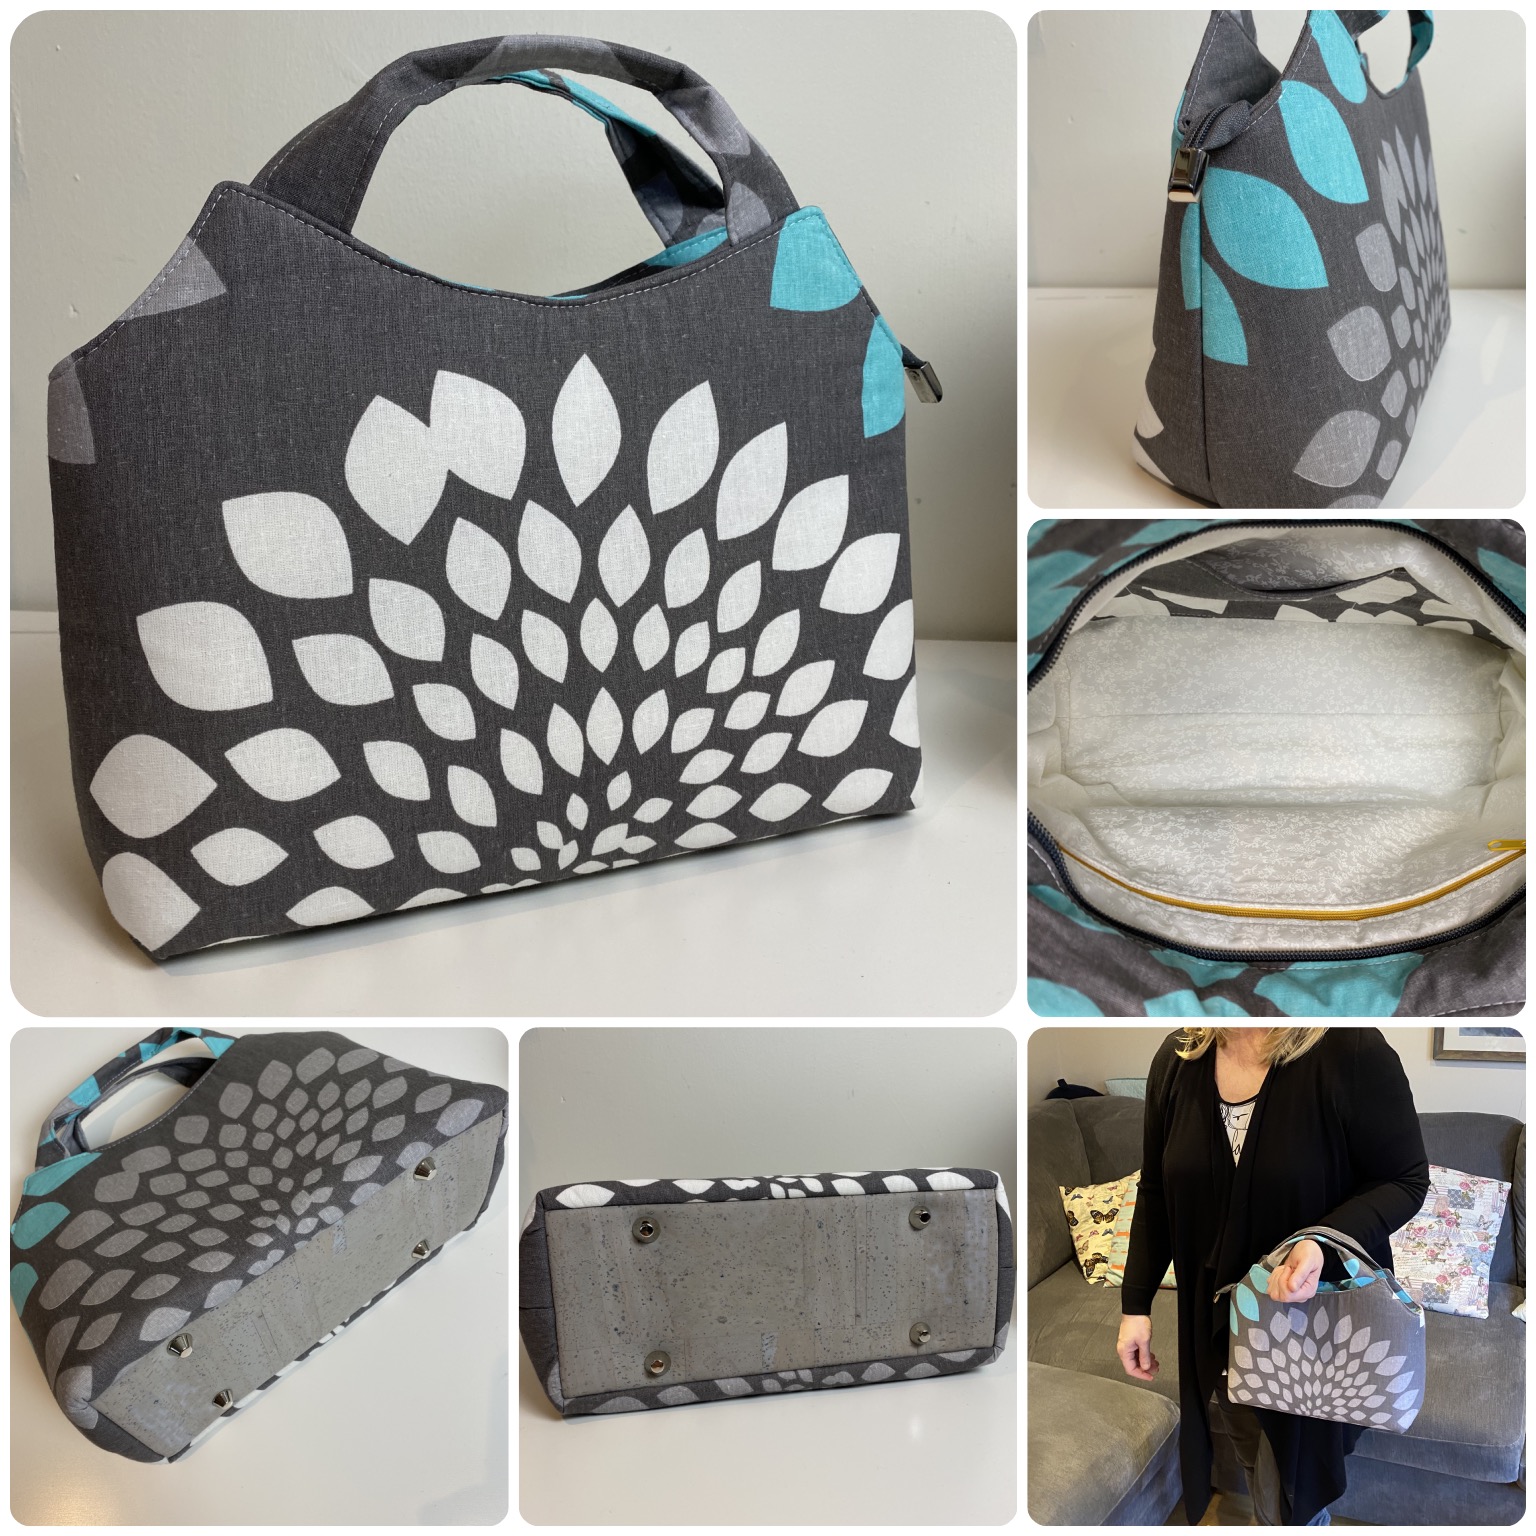 The Hope Handbag from Sewing Patterns by Junyuan 
, made by Laura Simons of Handmade by Laura